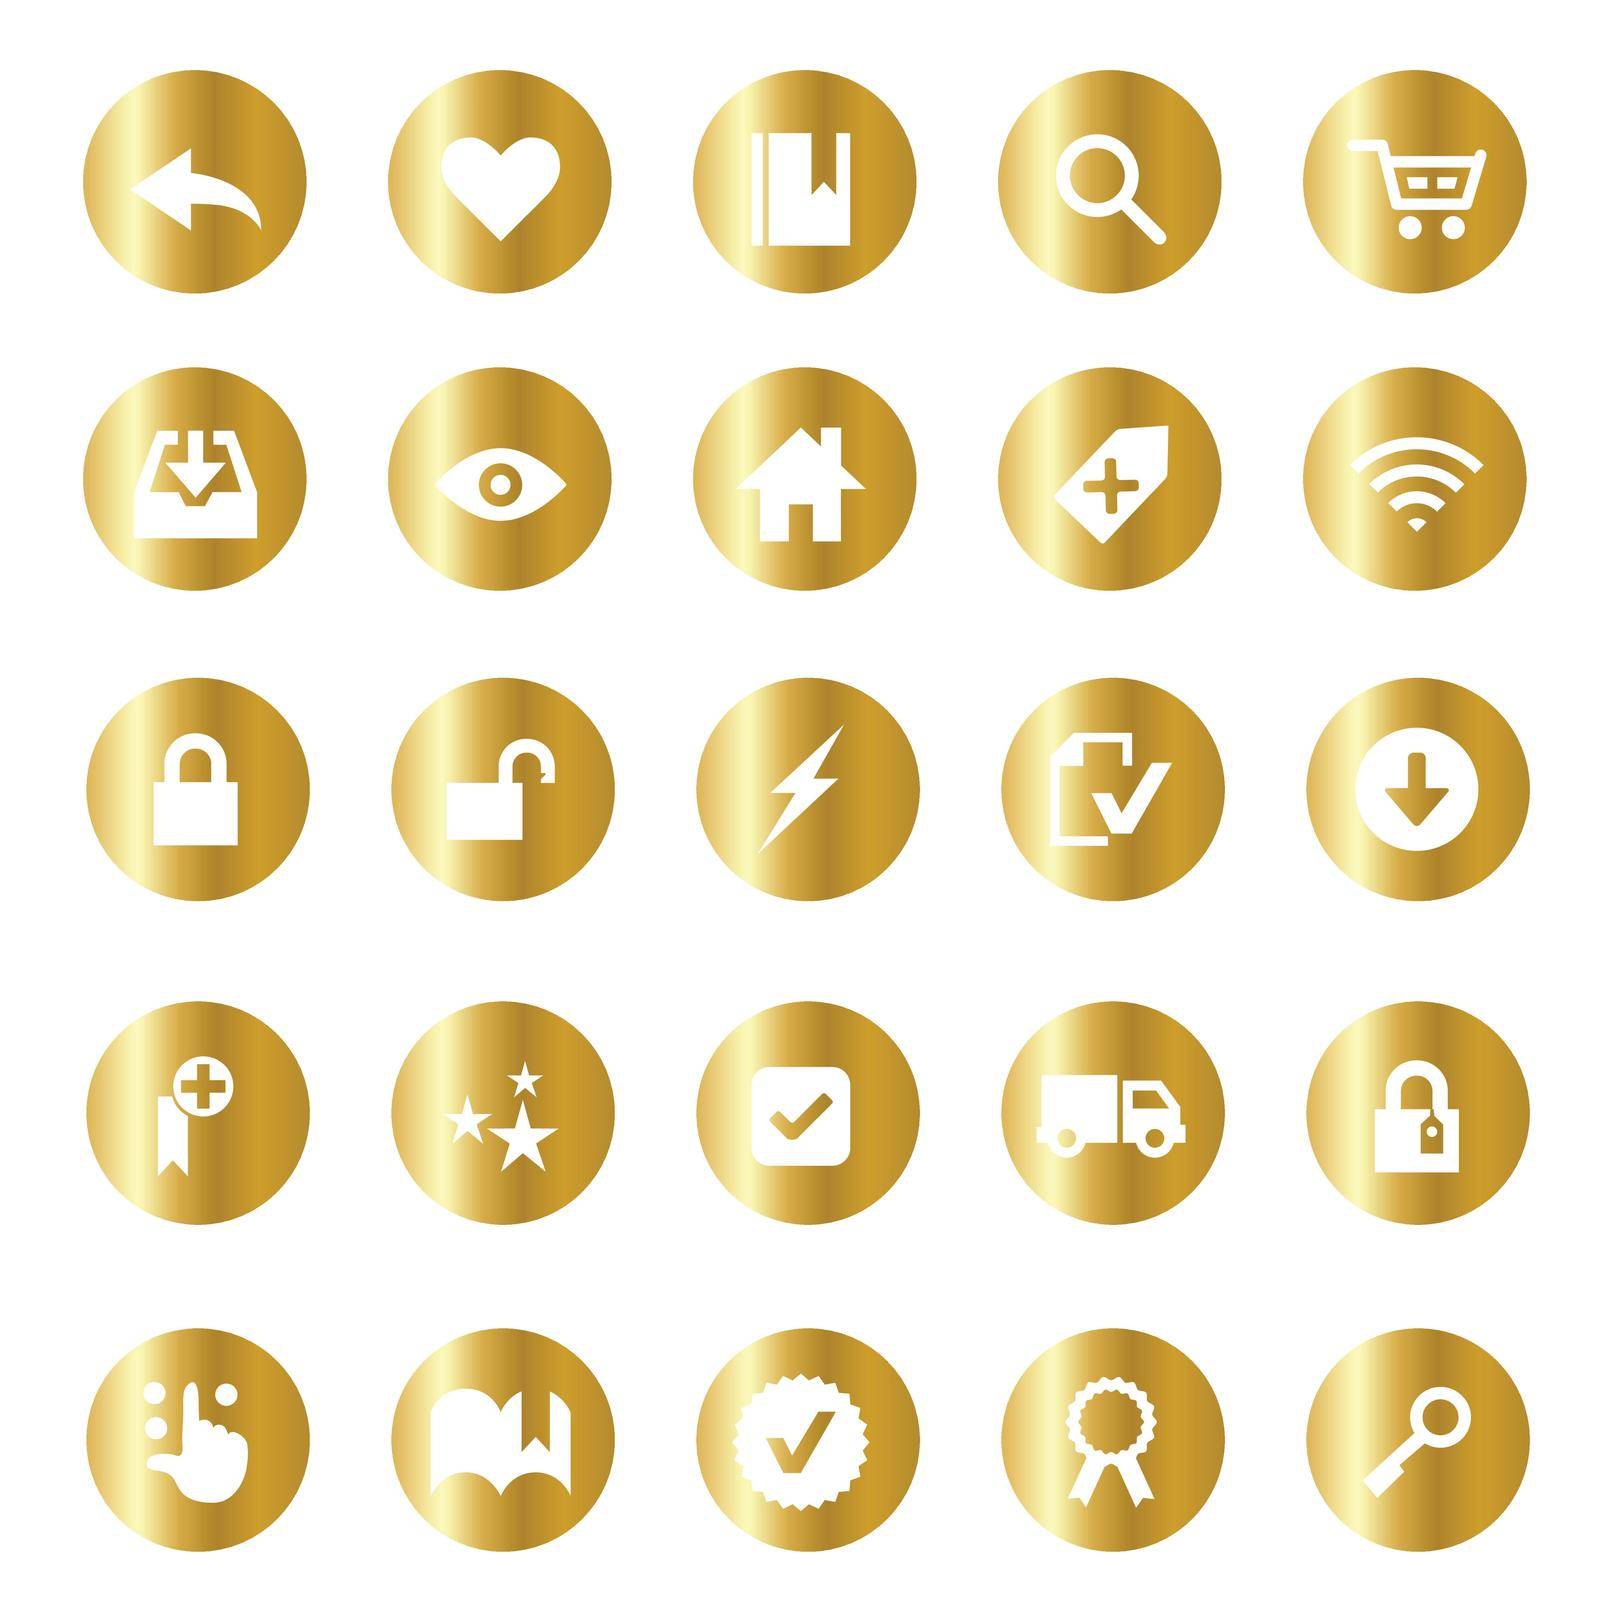 Gold ecommerce and online shopping icons orbis series by Vinhsino